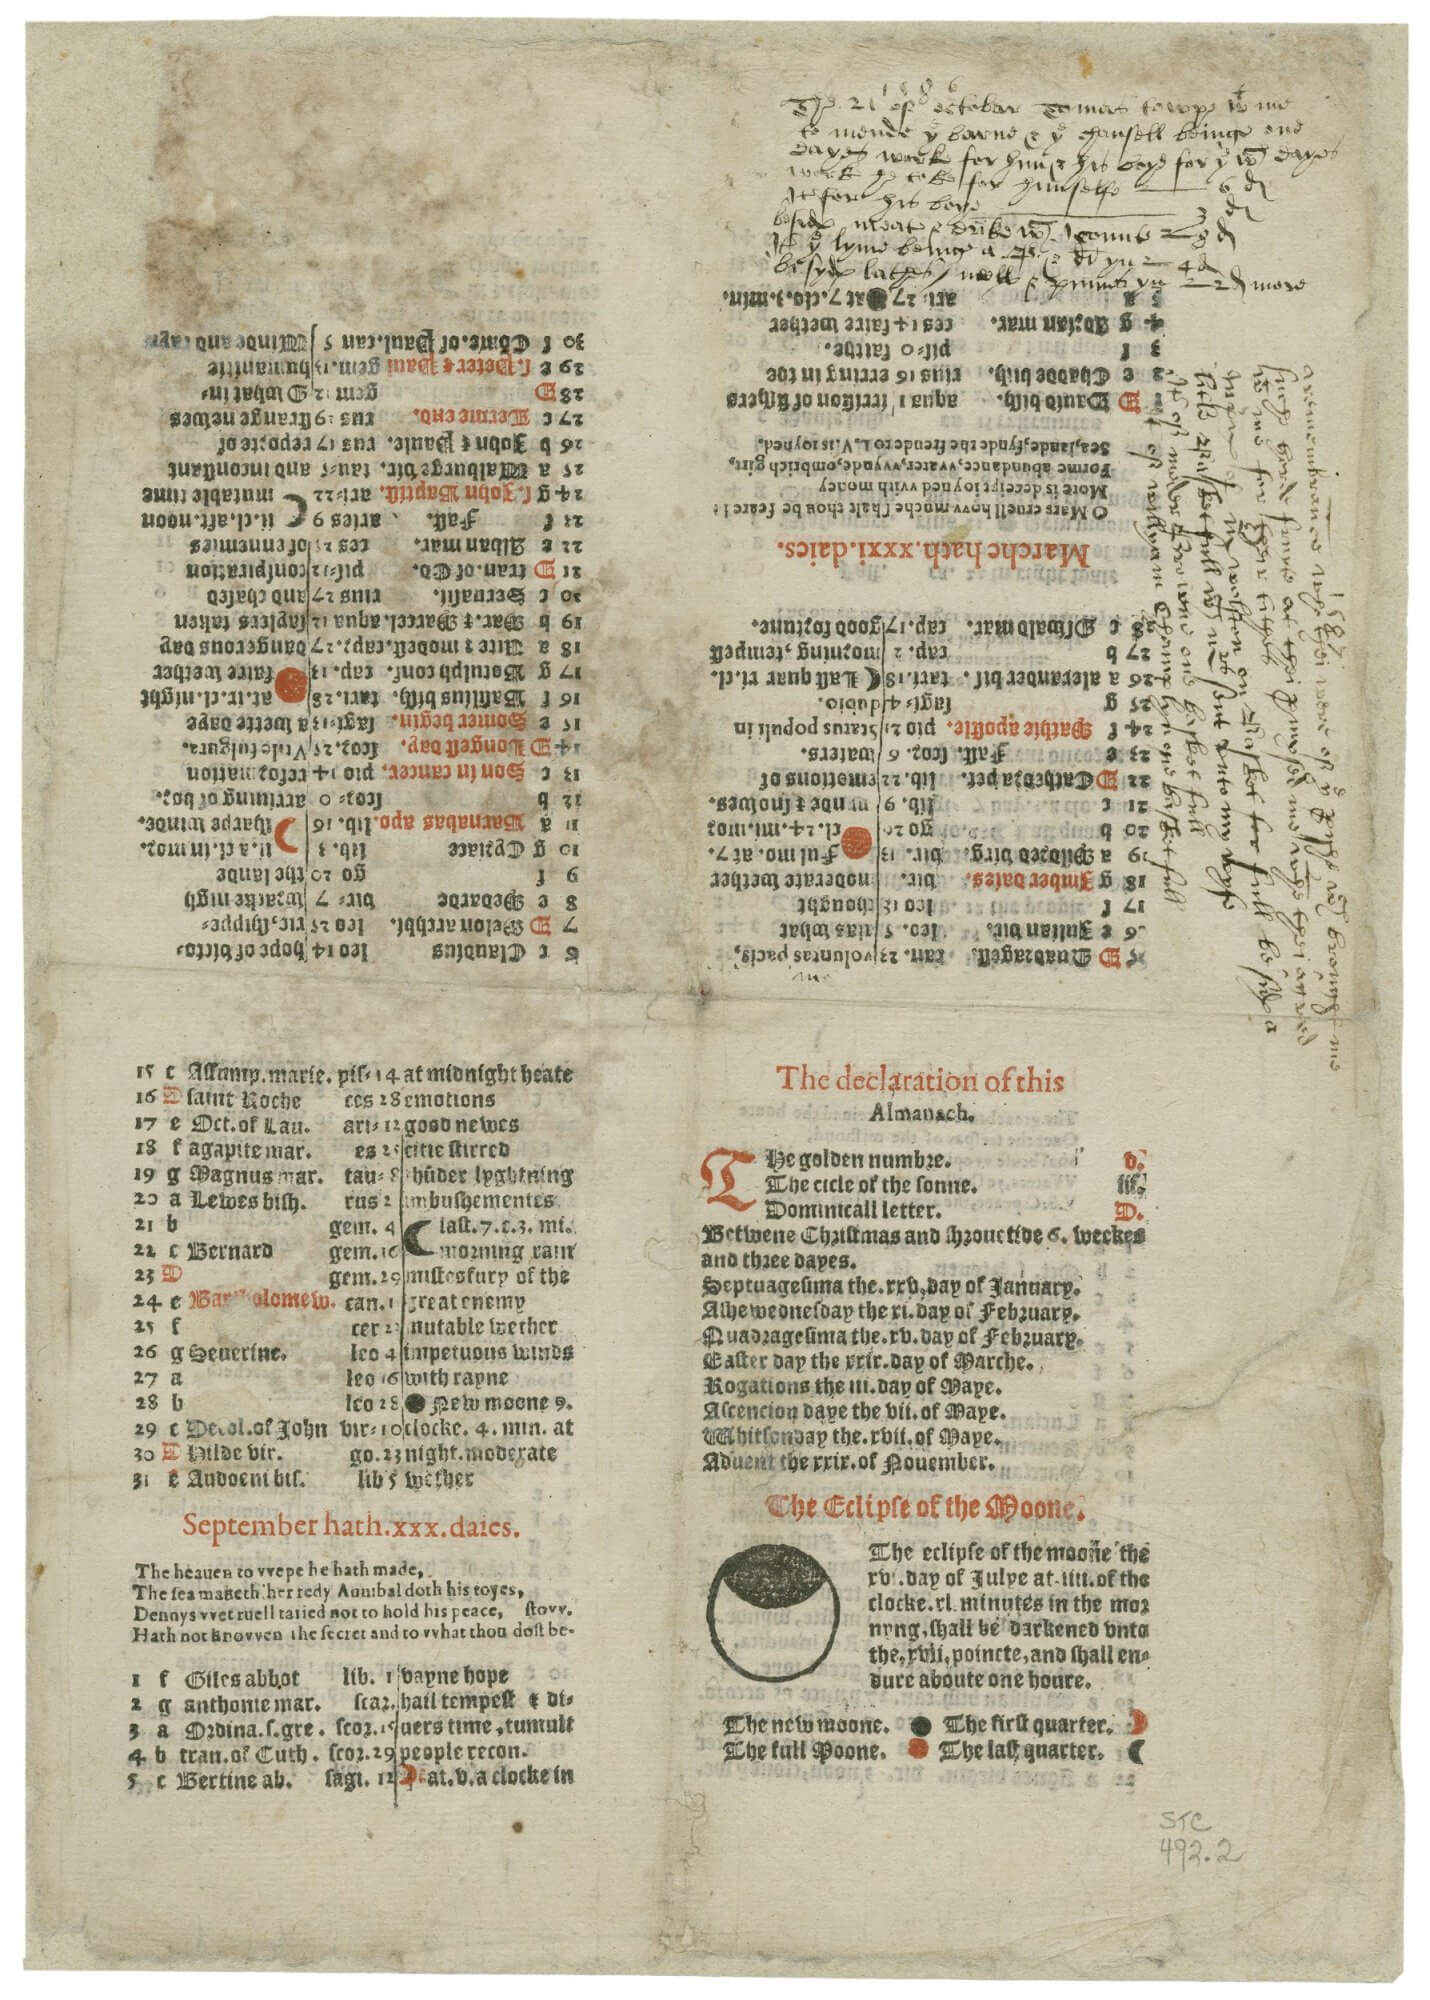 One of the benefits of looking at this unopened sheet is seeing how the use of red ink calls attention to specific dates and moon phases as well as serving to differentiate sections of the text. Our use now of the phrase "red-letter day" comes from the practice of using red ink to indicate festivals, a practice that originated in manuscripts.